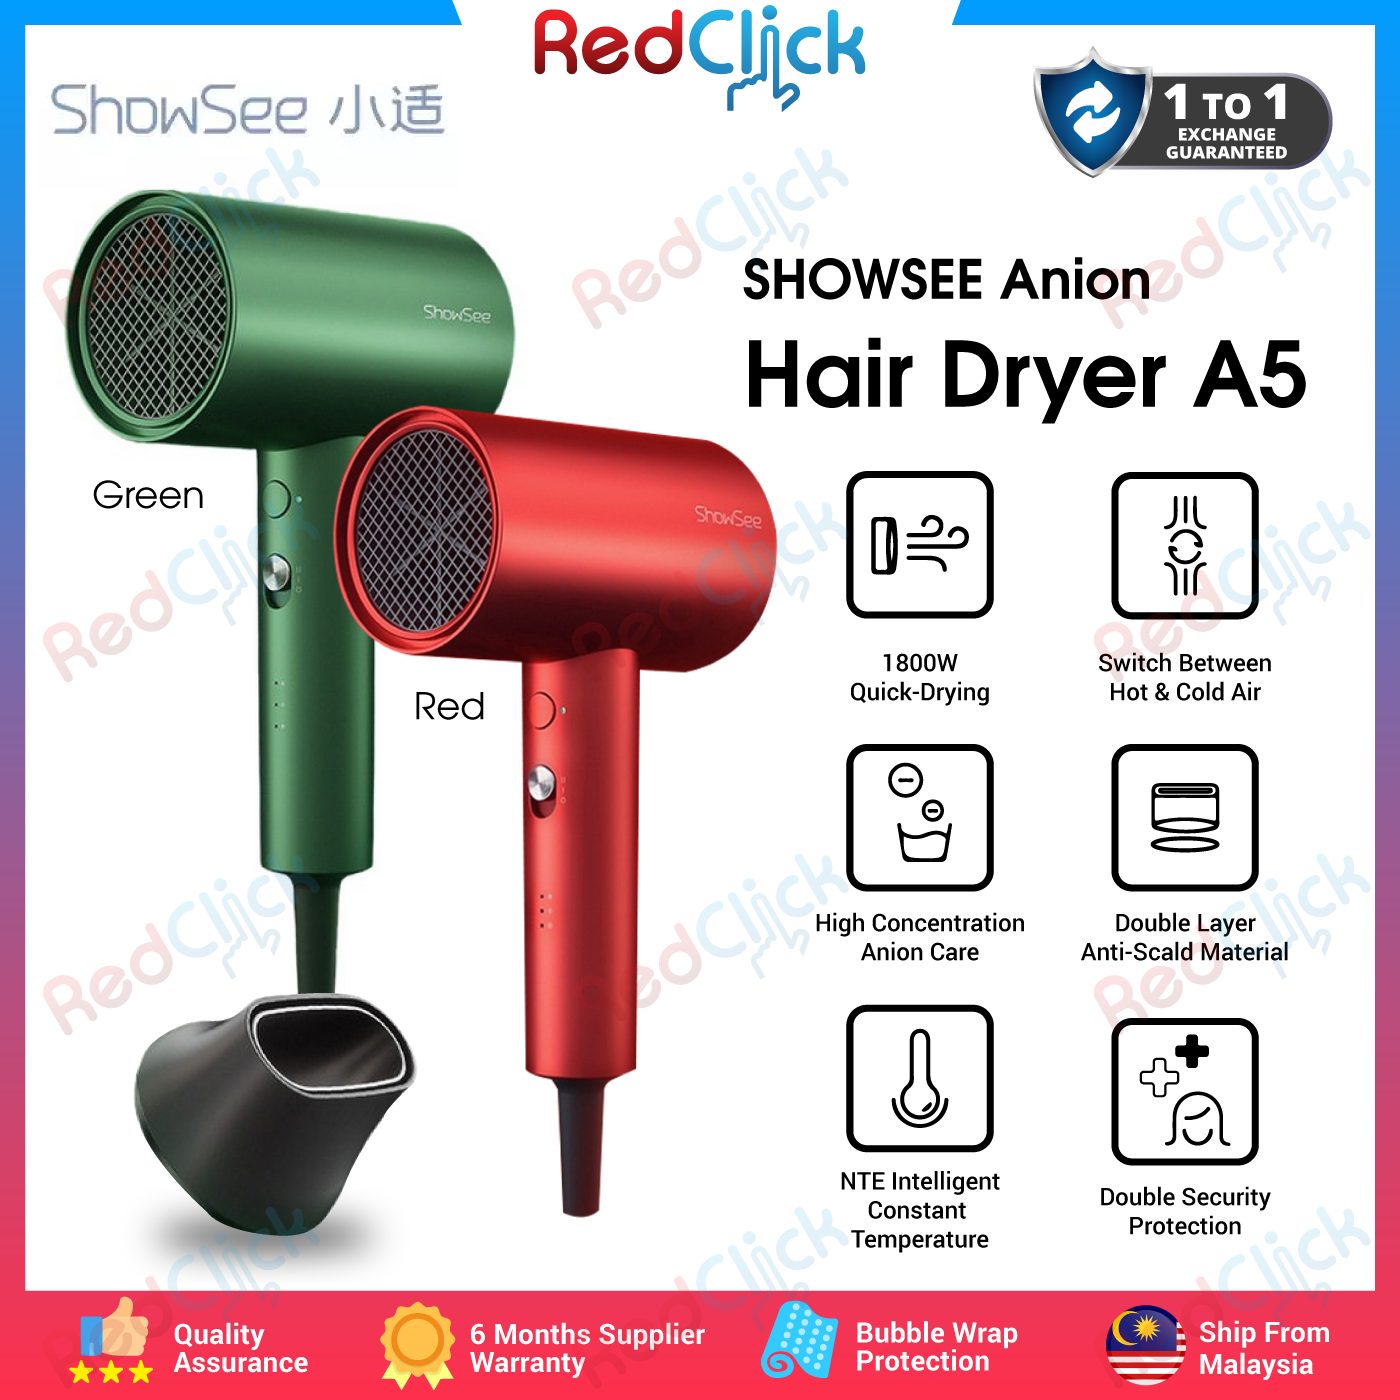 Showsee A5 Anion 1800W Hair Dryer High Concentration Anion Case Switch Hot And Cold Air + Free Gift